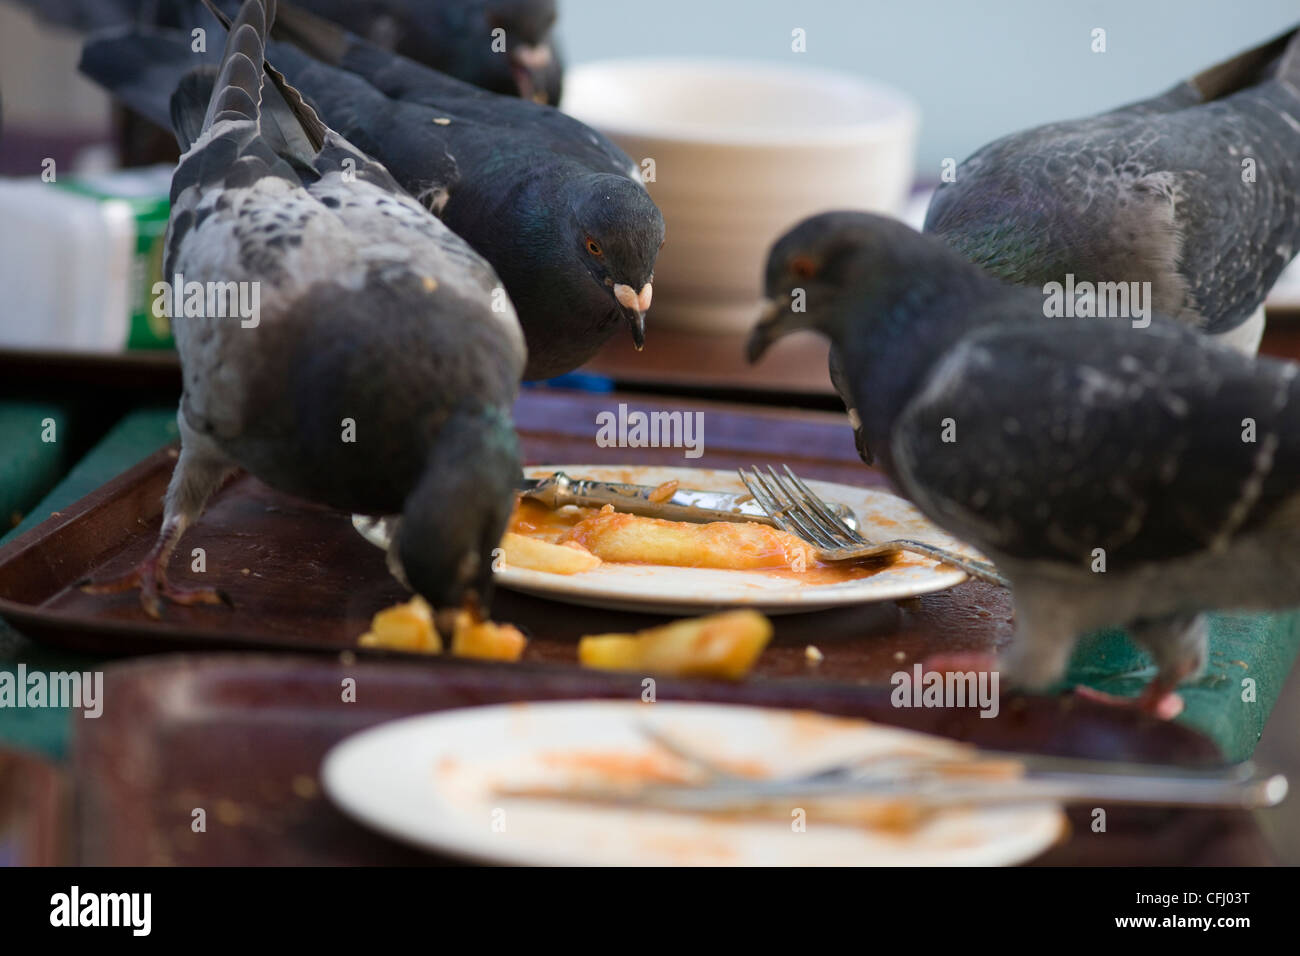 Pigeons scavenging on plates of leftover food on an outdoor restaurant cafe table Stock Photo